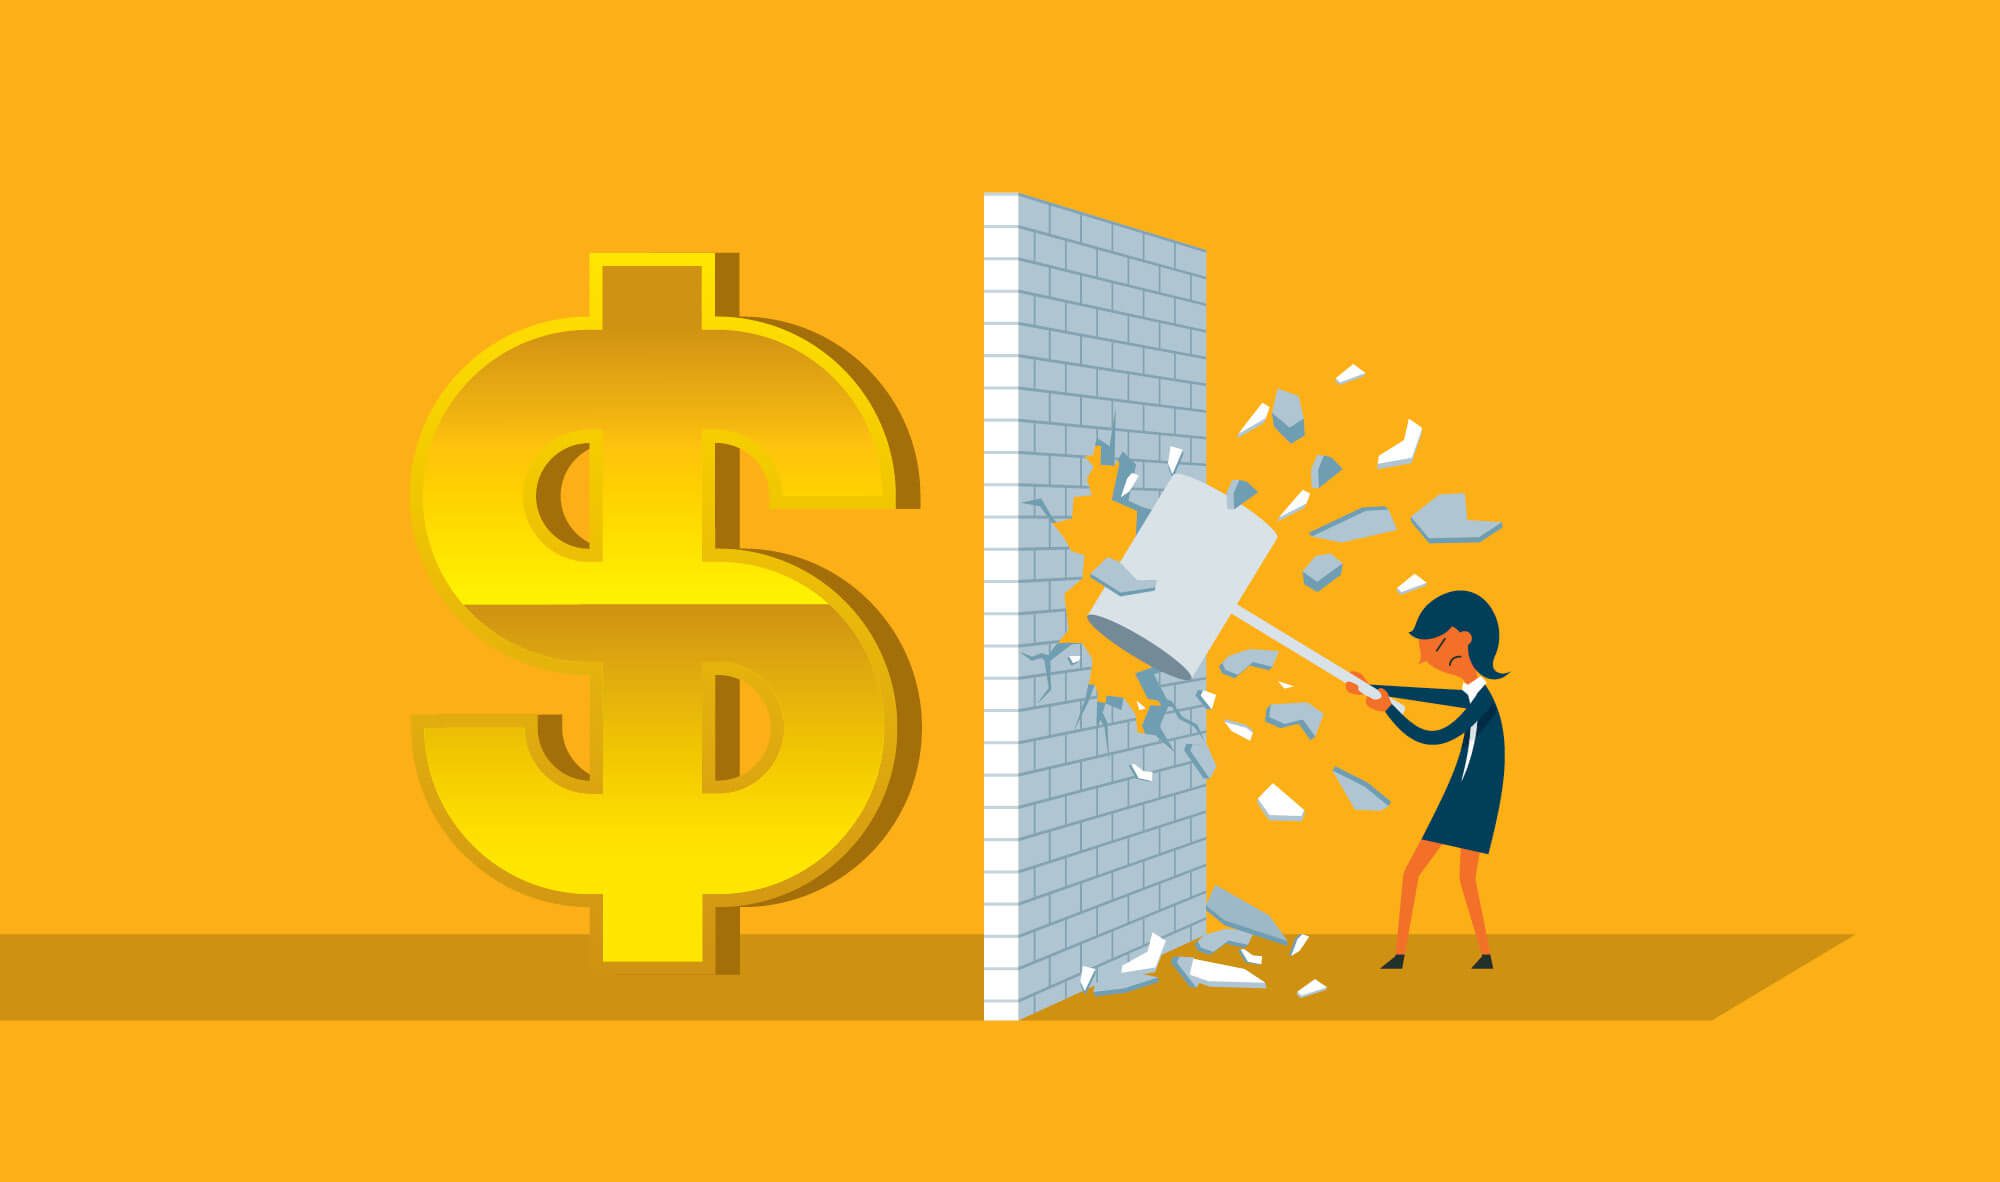 Illustration of woman breaking through a cinder block wall to reach a large dollar sign.